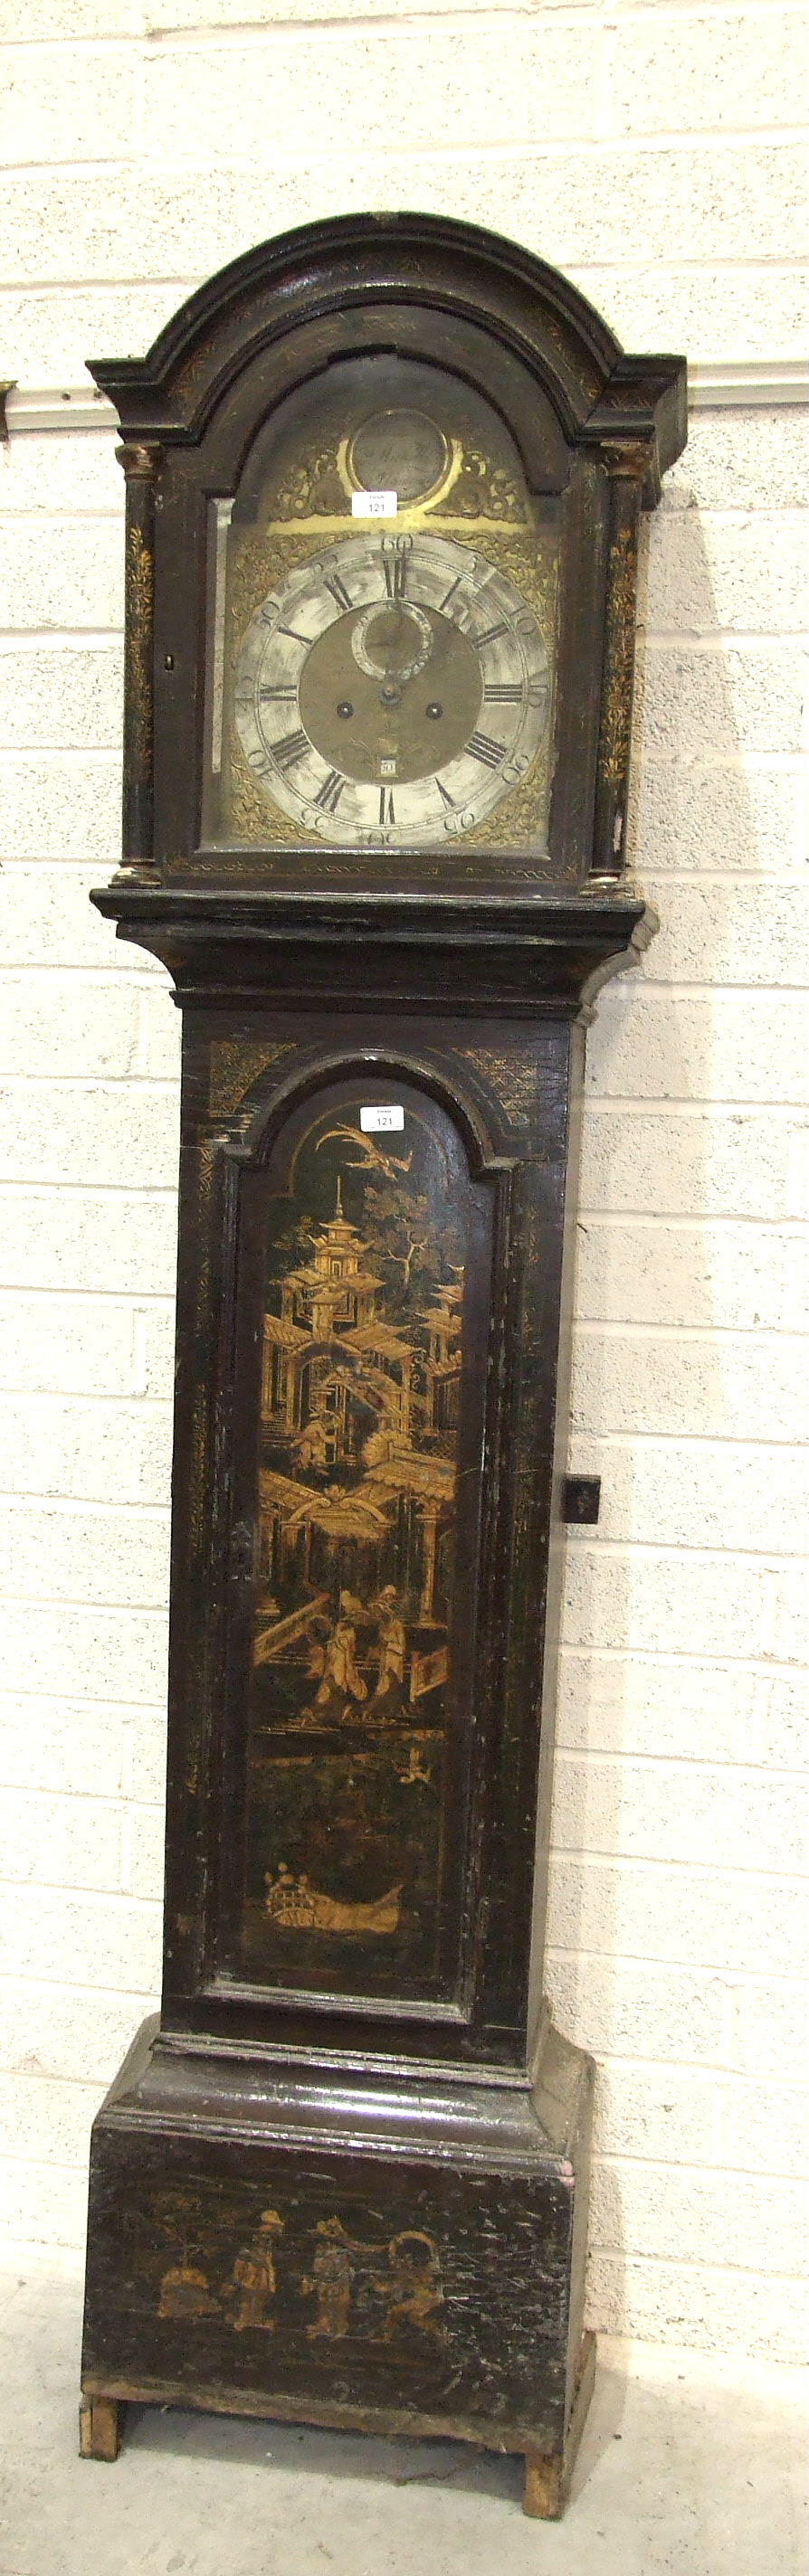 Walter Michell, Plymouth, a mid-18th century long case clock, the green lacquered case decorated